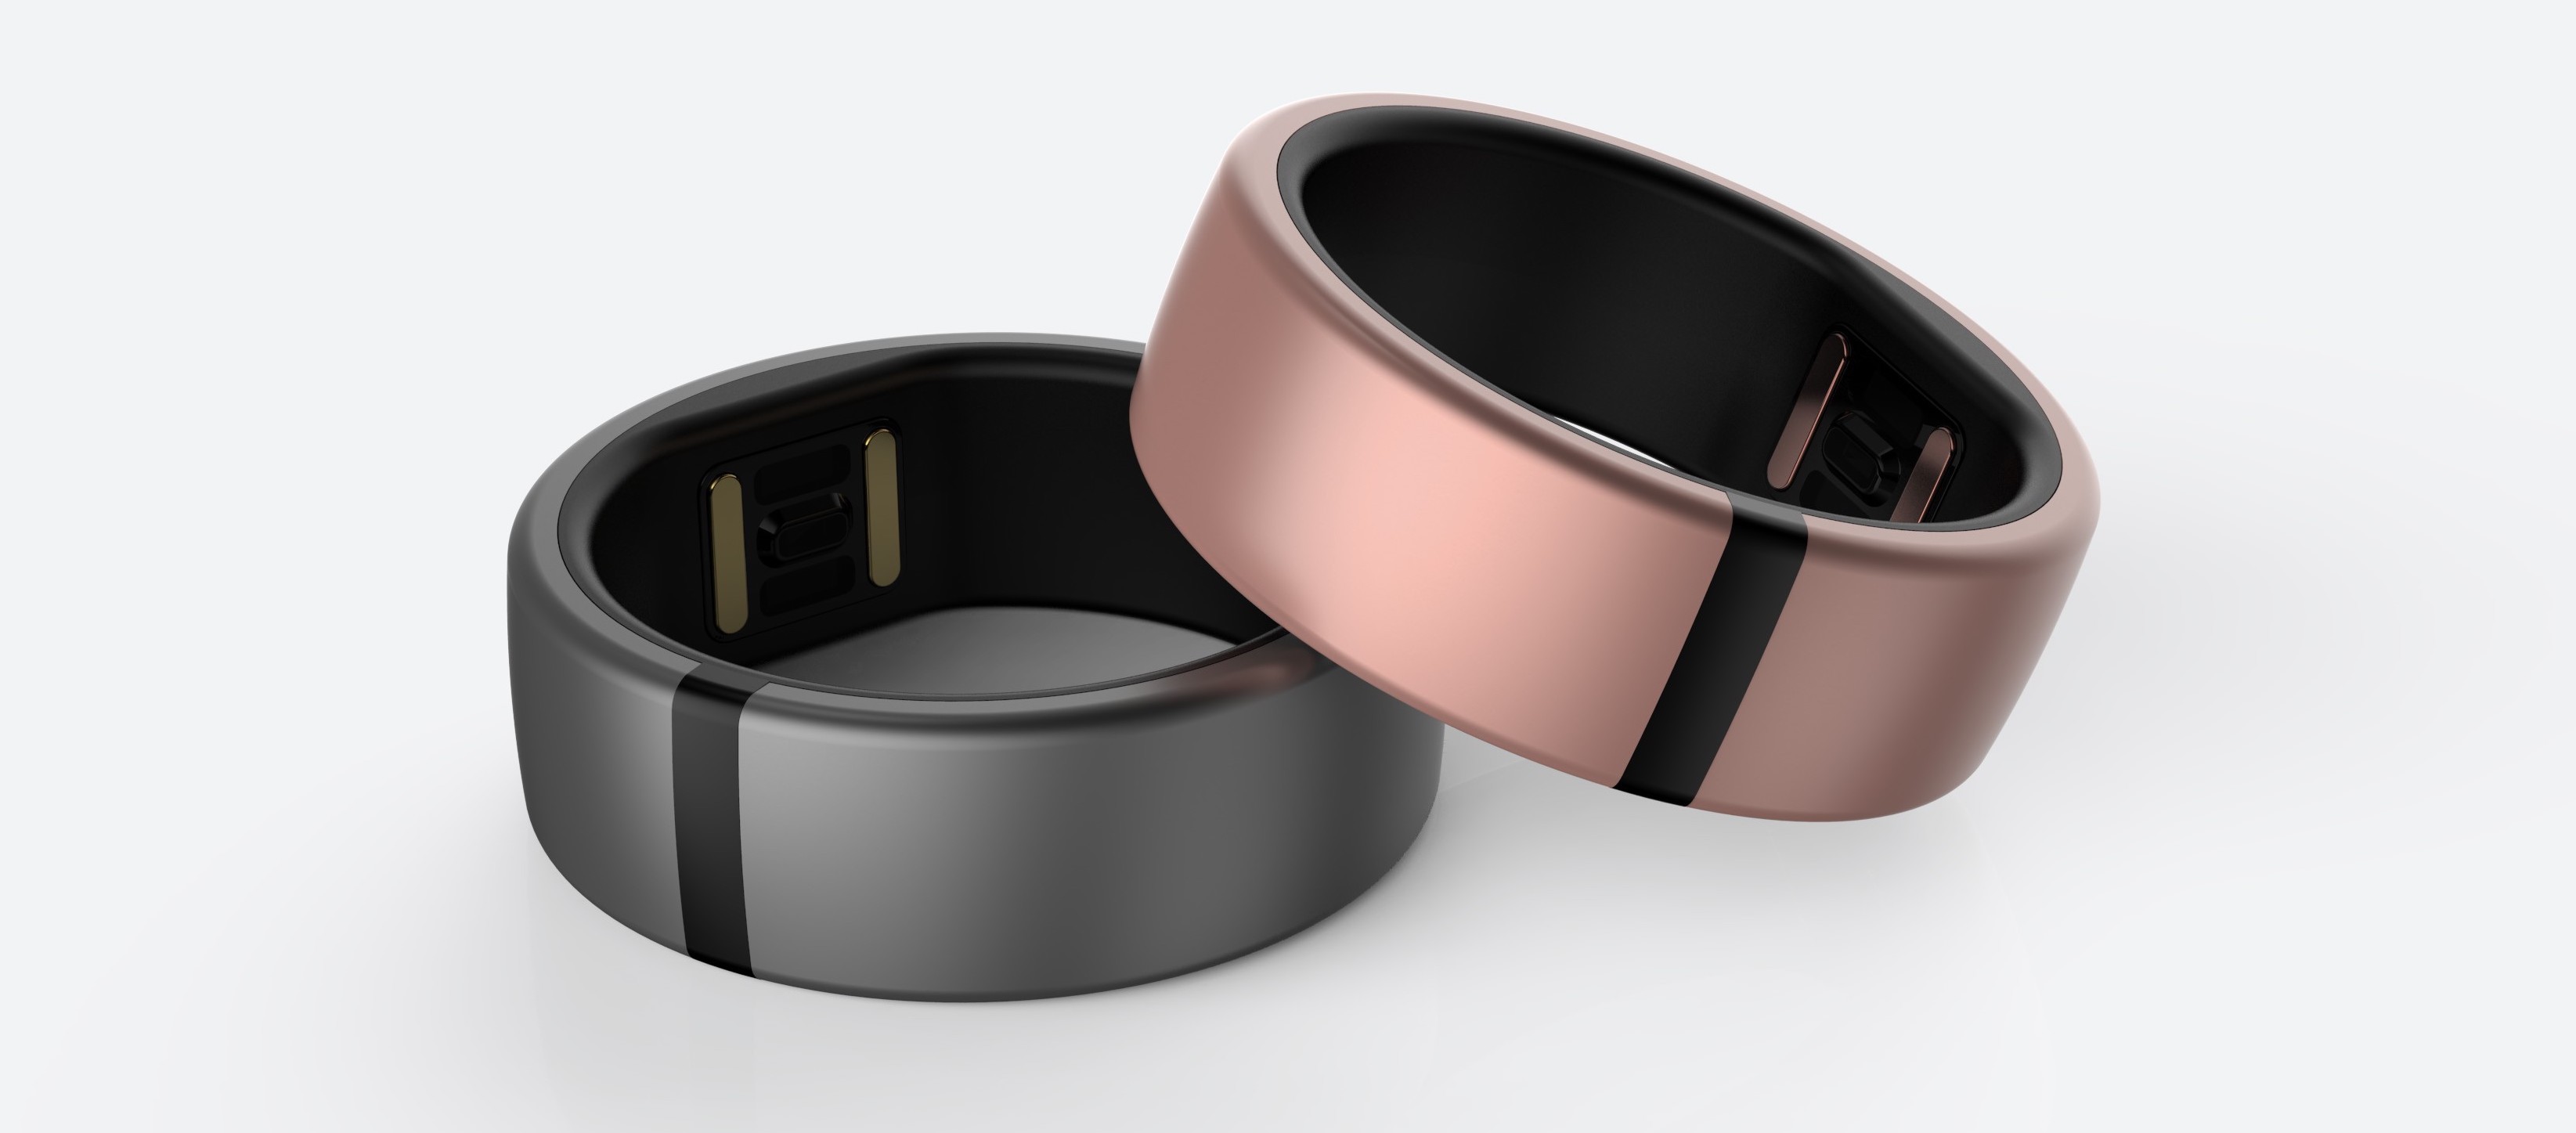 Motiv's fitness tracking ring gets even smarter with Apple Health